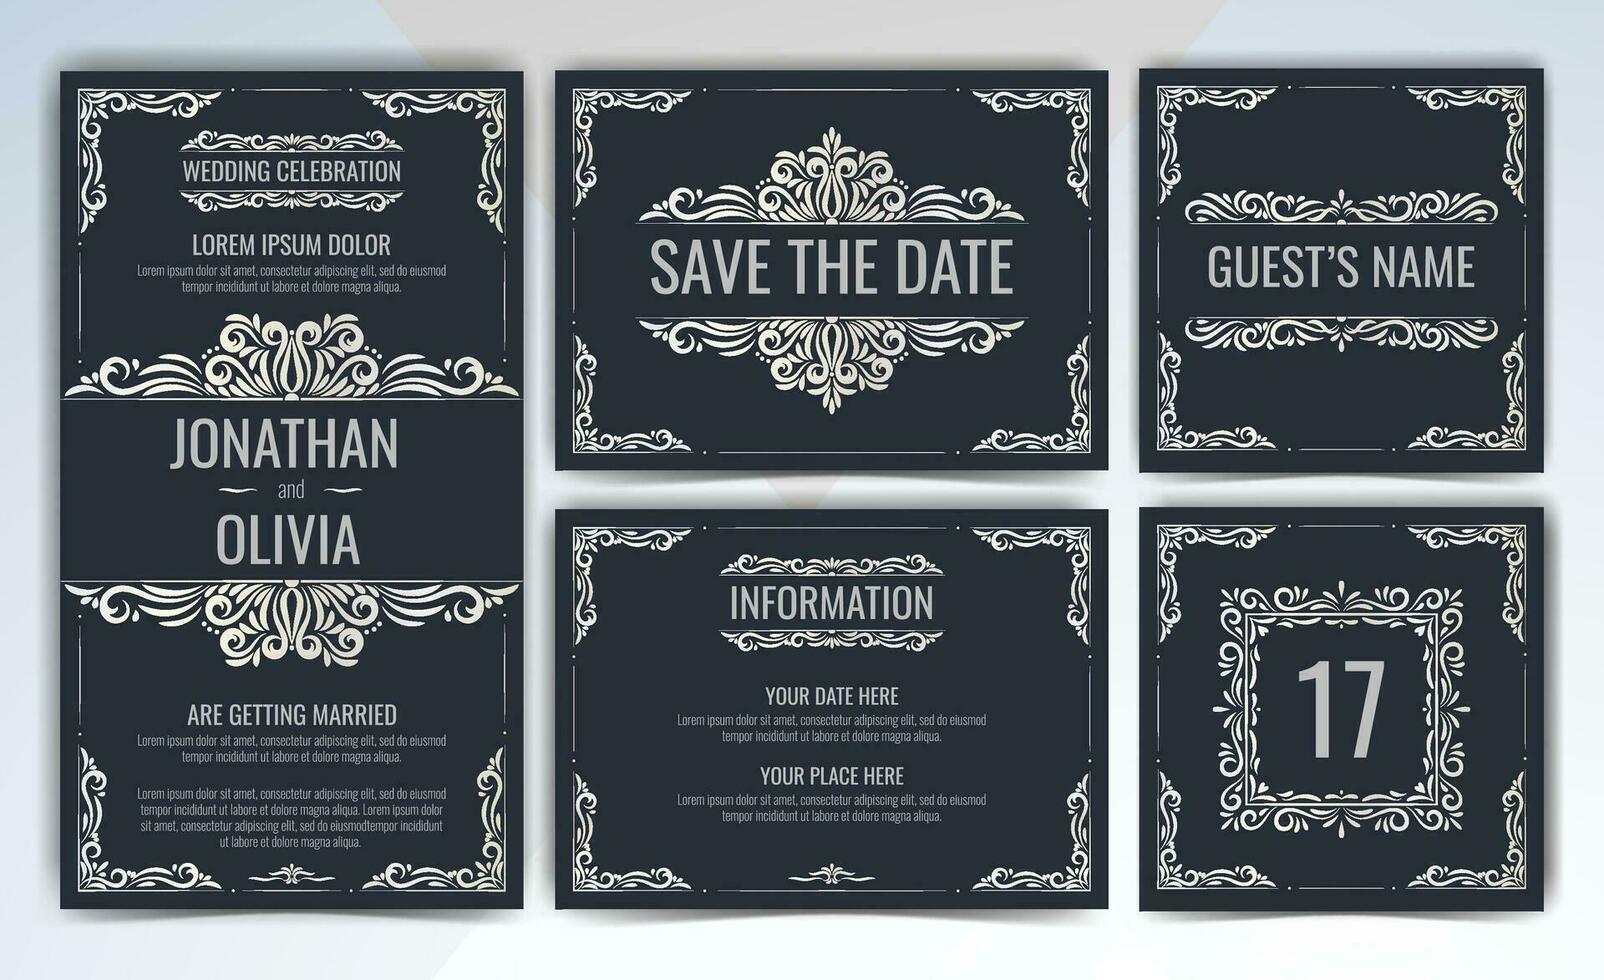 Set of wedding invitations cards with silver ornaments. Elegant classic invite, save the date, table number and information design. Vintage victorian frames and decorations. vector